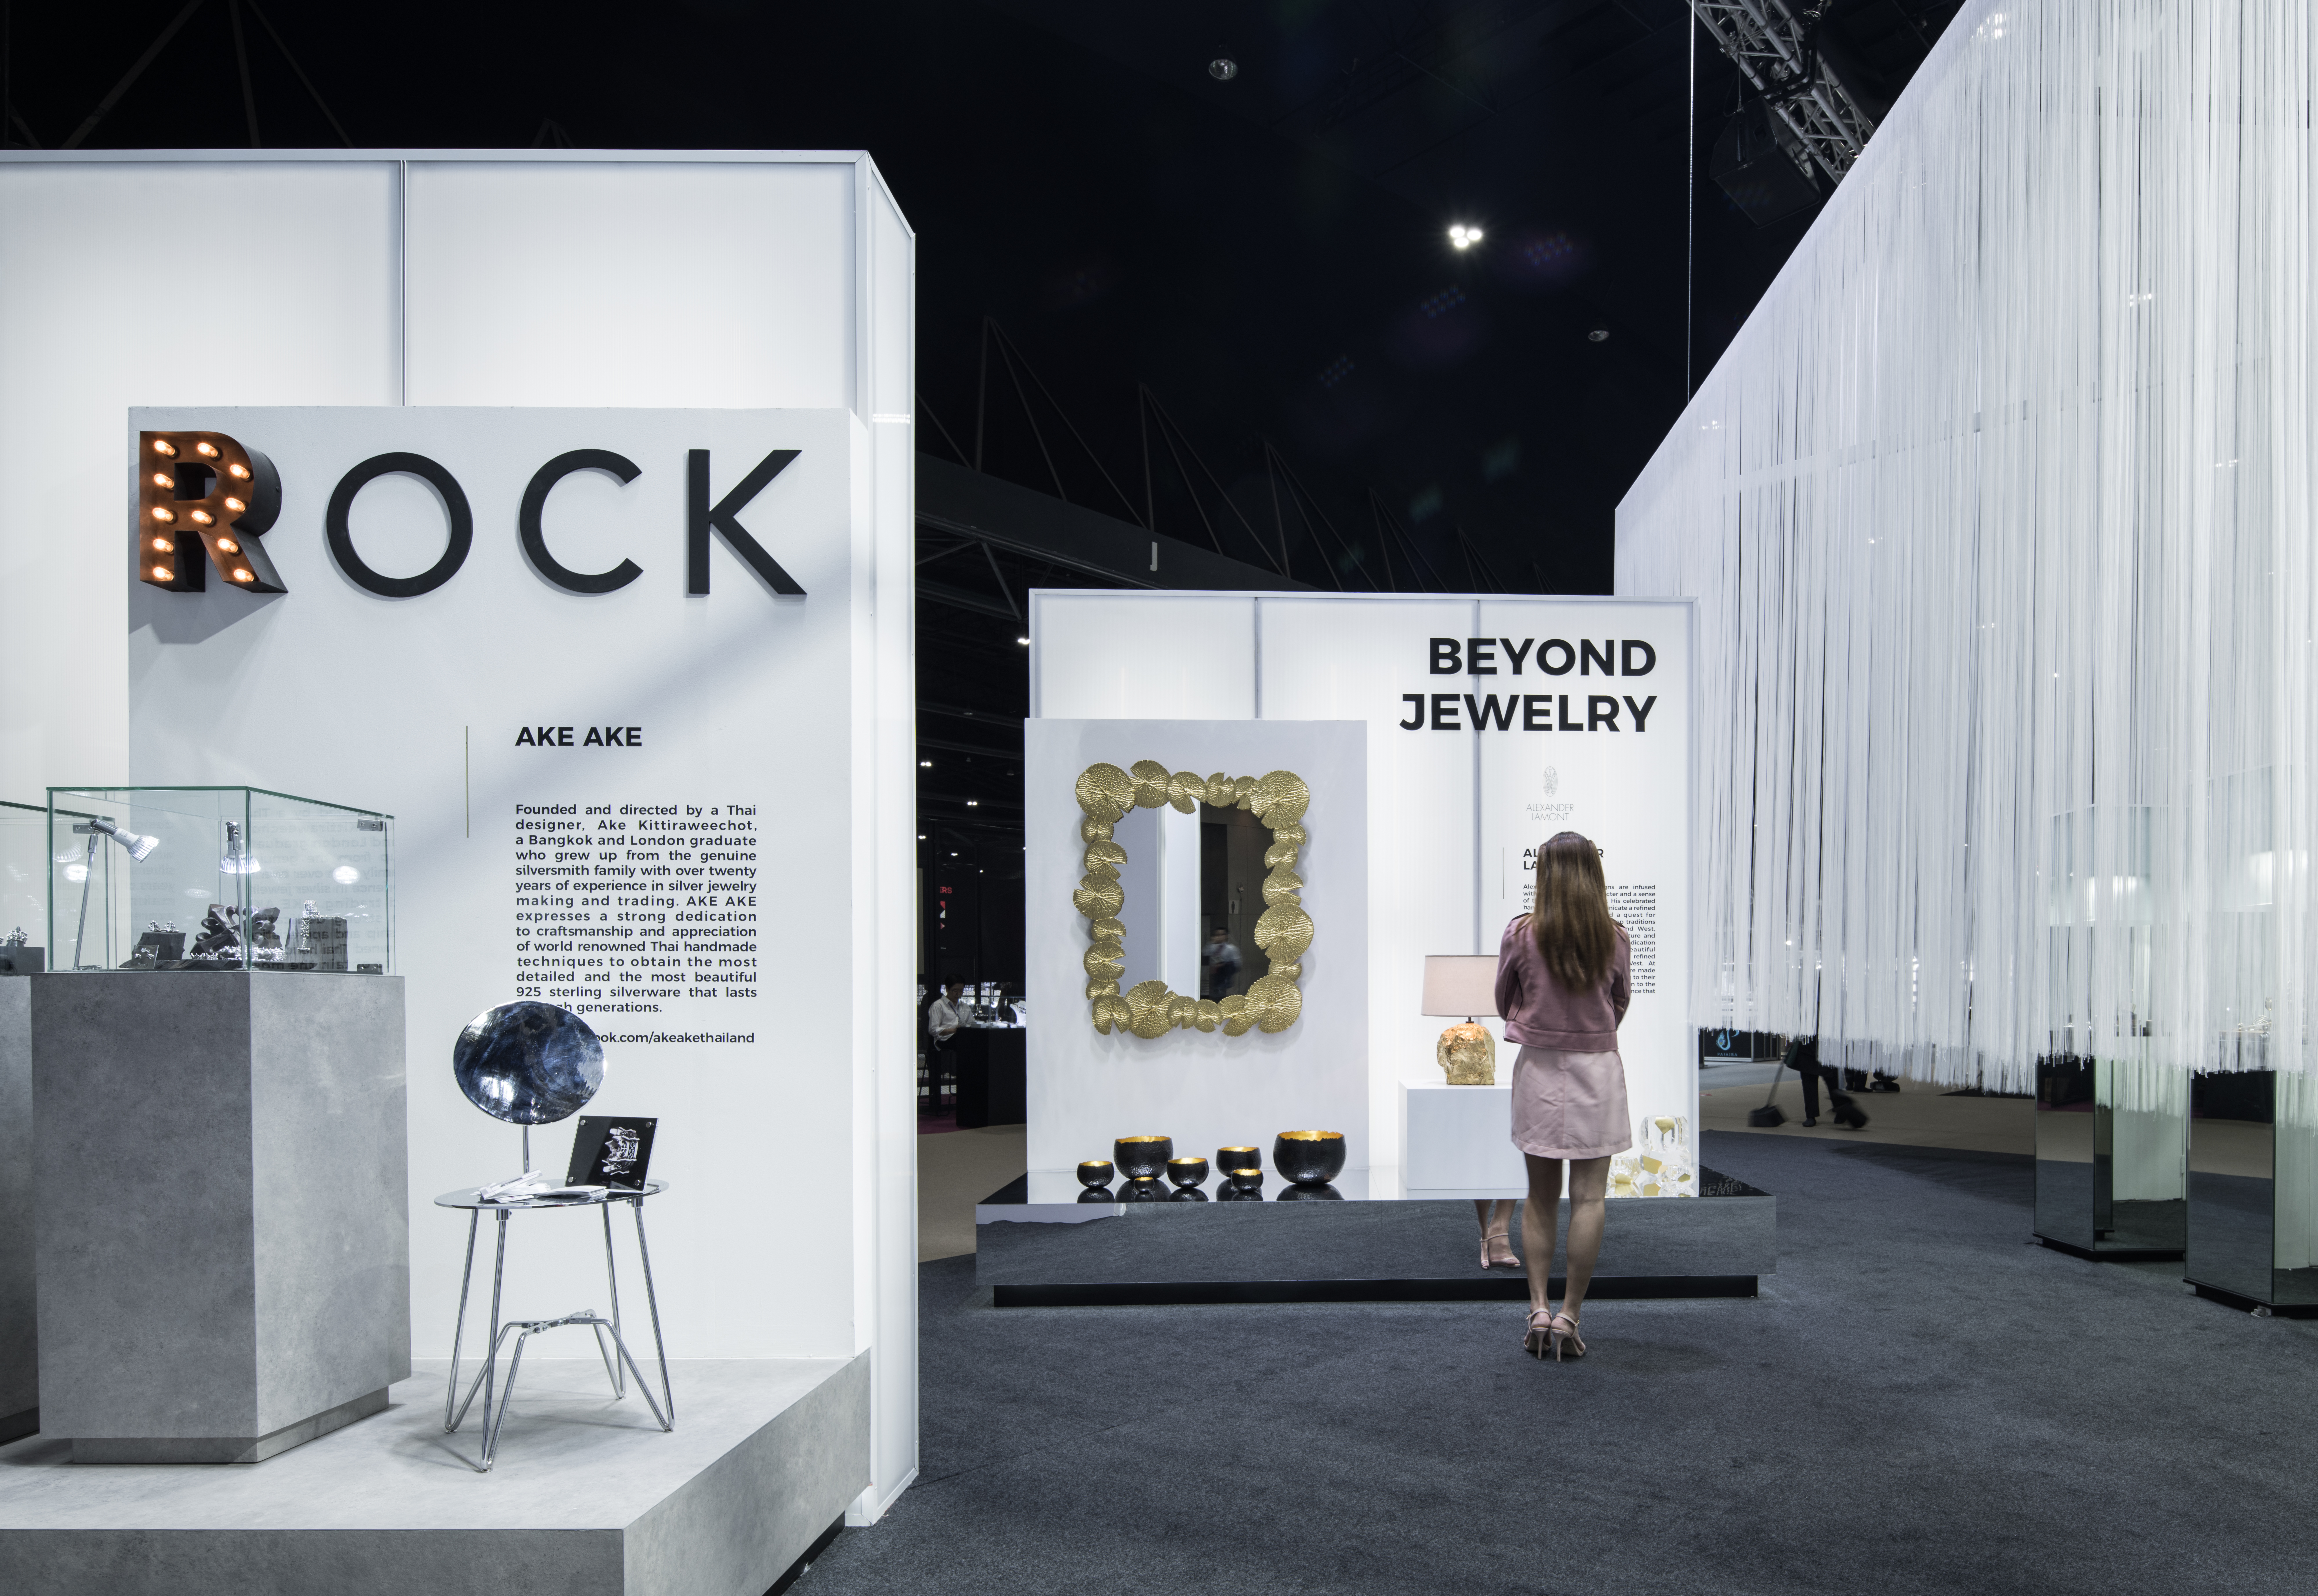 The Niche Showcase exhibition at the 61st Bangkok Gems and Jewelry Fair